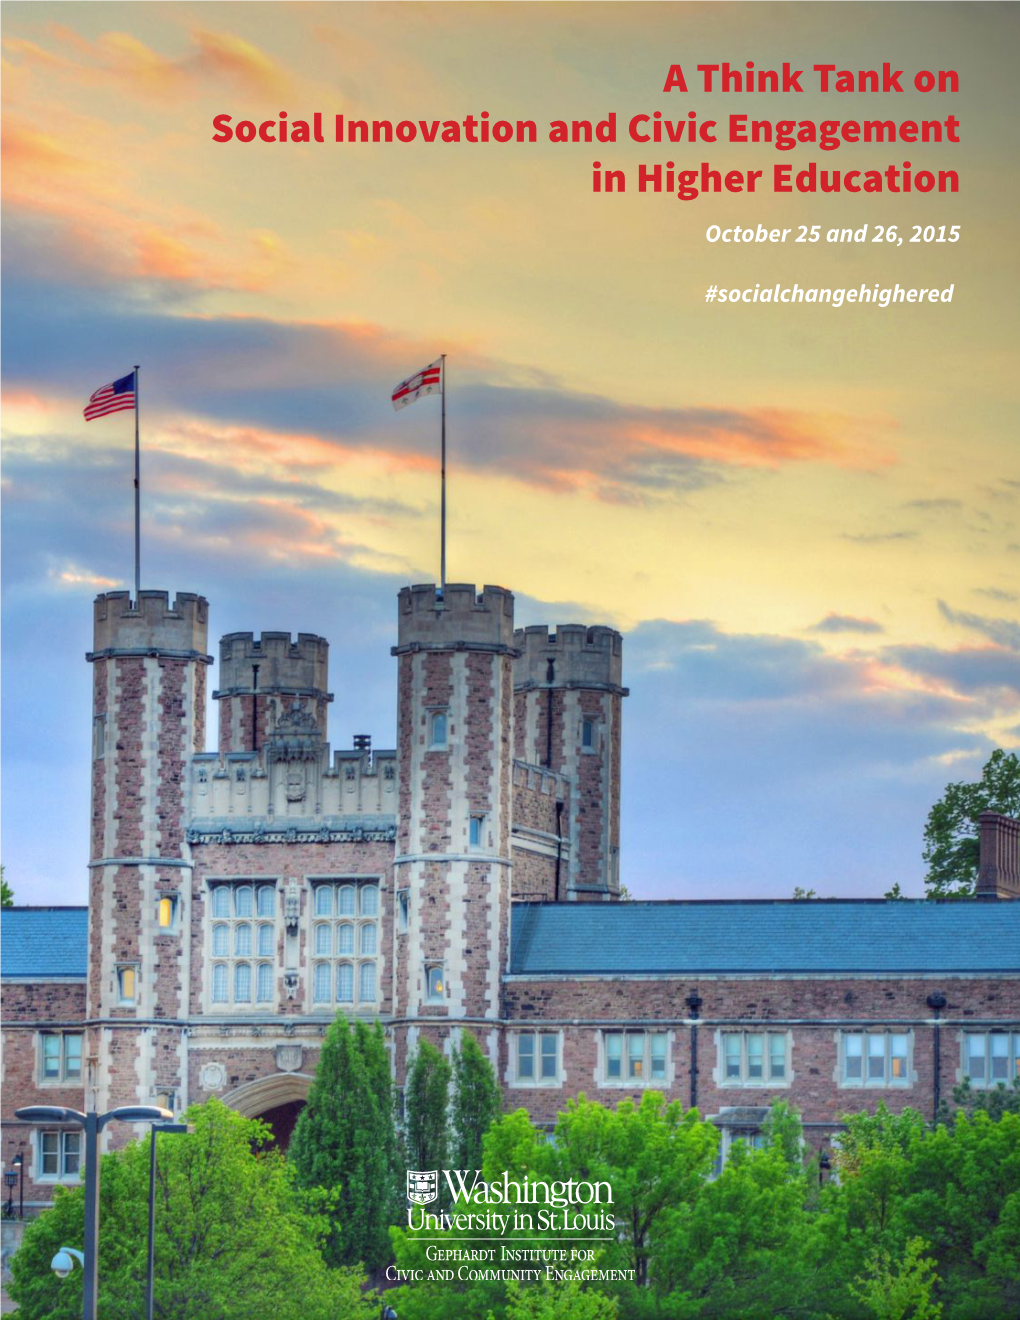 A Think Tank on Social Innovation and Civic Engagement in Higher Education October 25 and 26, 2015